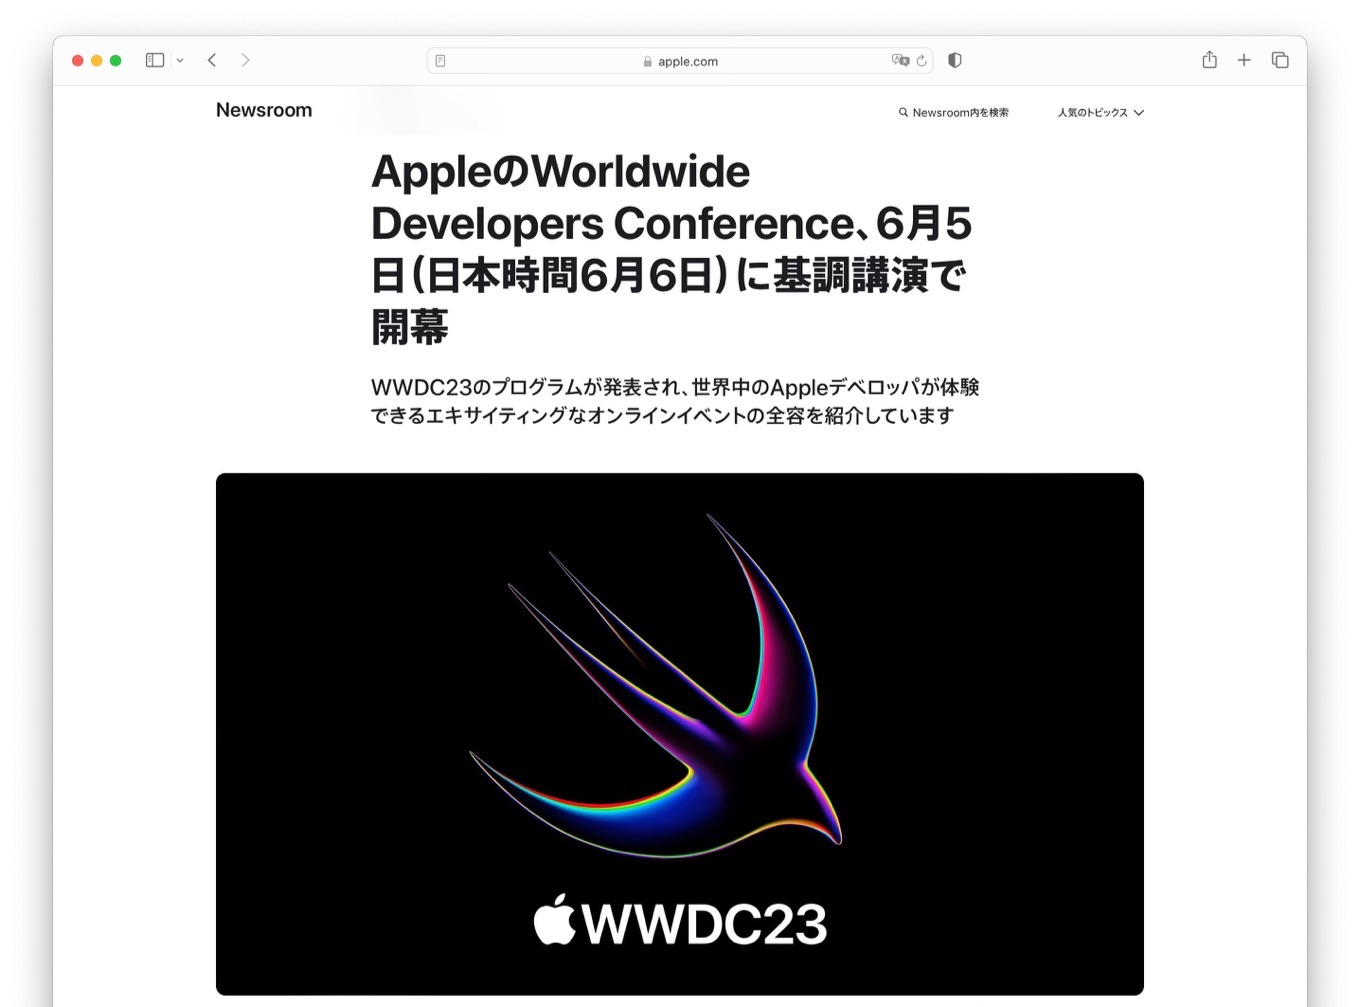 AppleのWorldwide Developers Conference、6月5日（日本時間6月6日）に基調講演で開幕